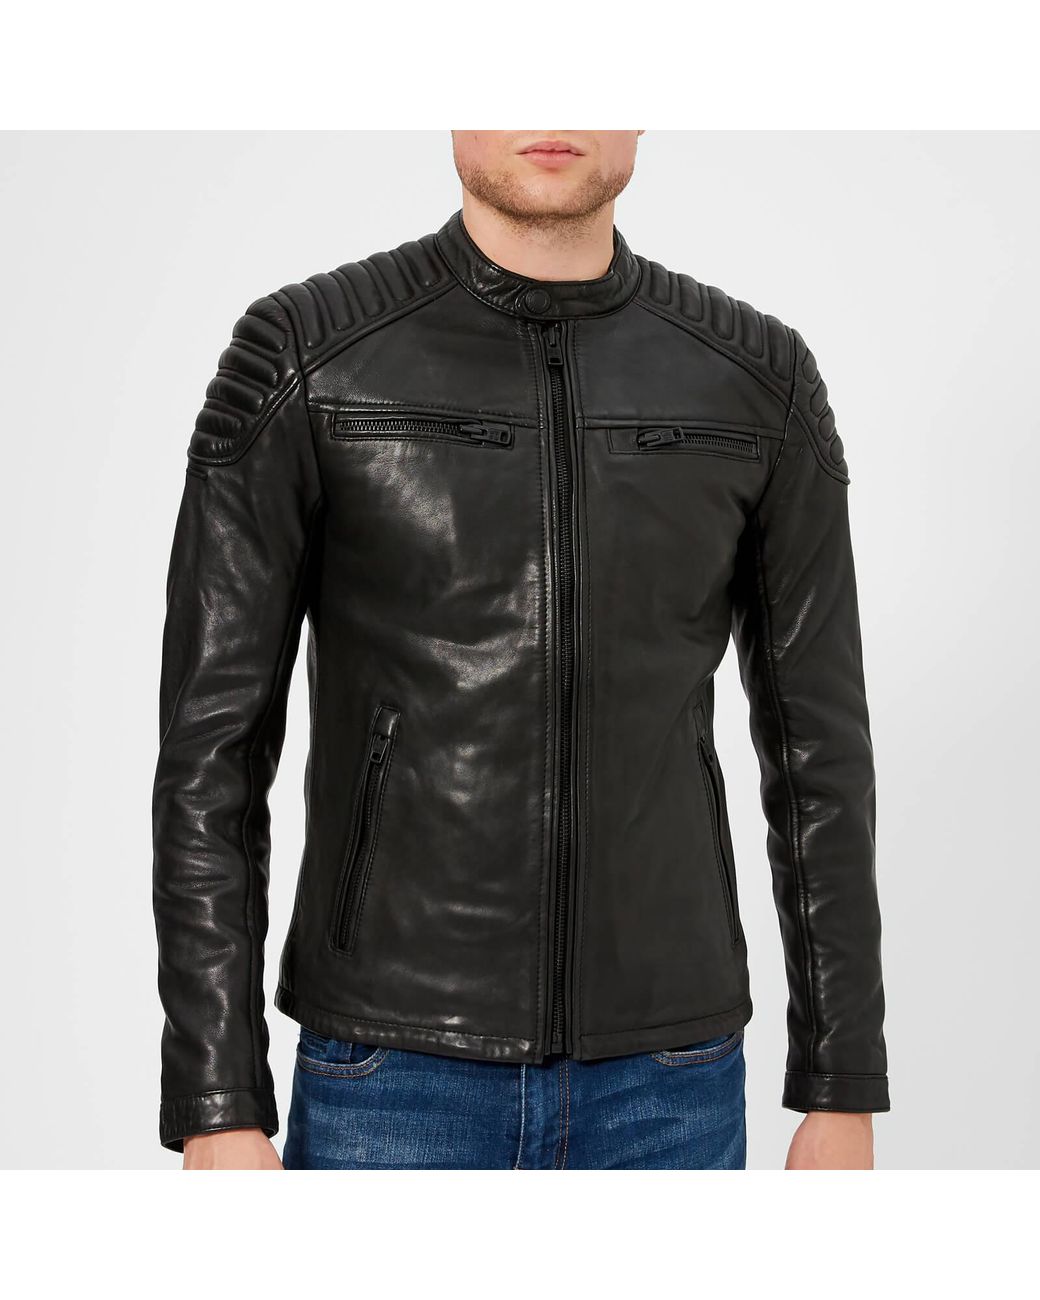 Superdry New Hero Leather Racer Shop Clearance, 46% OFF |  public-locksmith.com